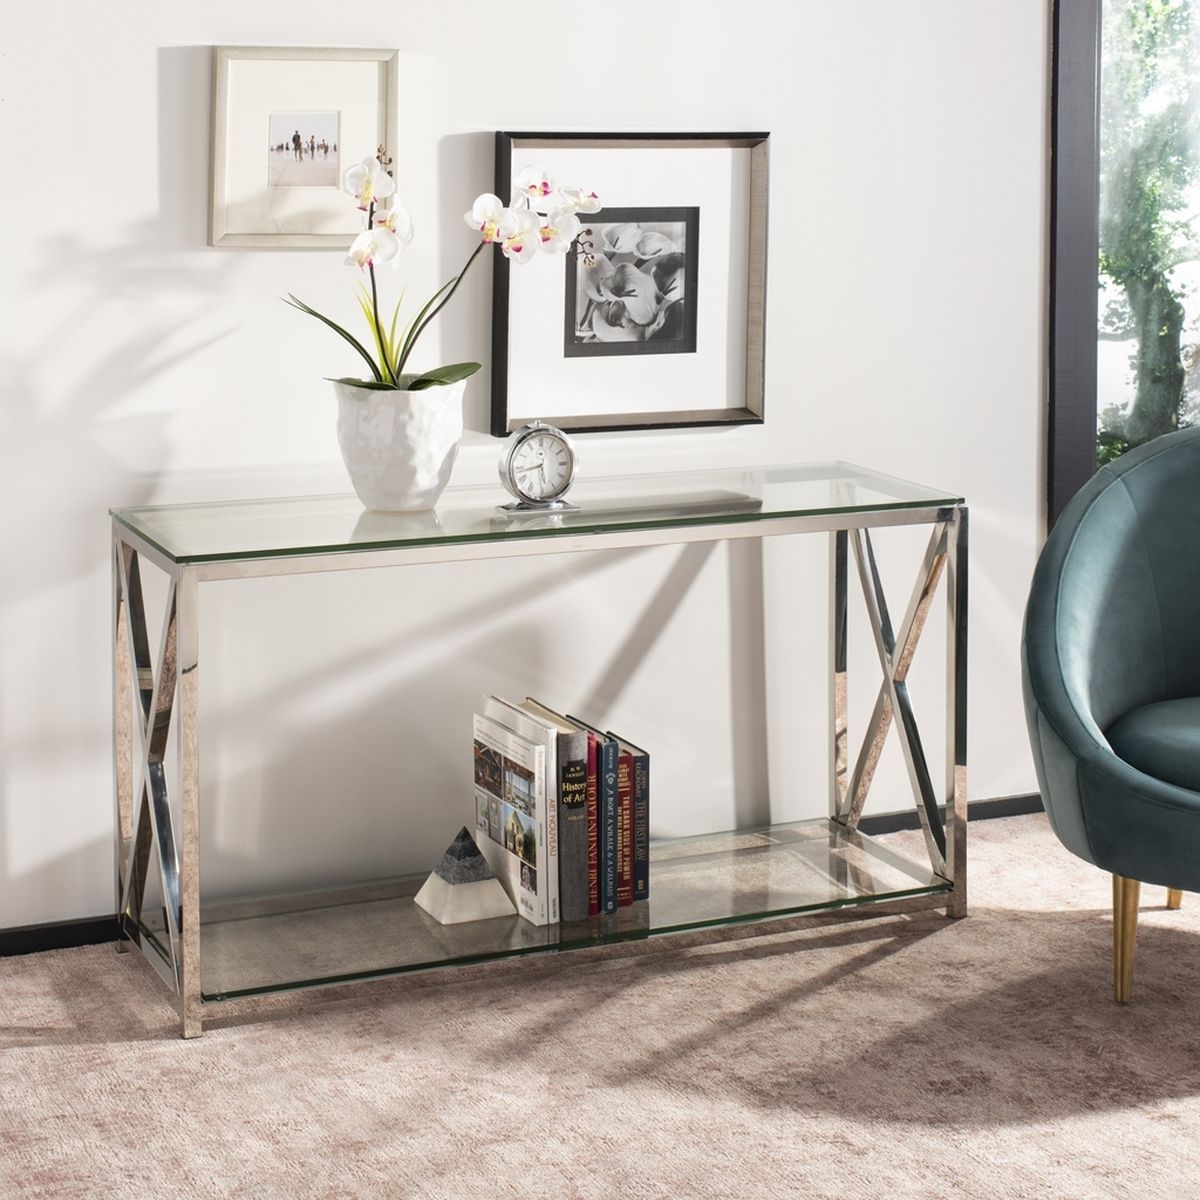 Stainless Steel Chrome + Glass Console Table – Safavieh With Regard To Silver Stainless Steel Console Tables (View 10 of 20)